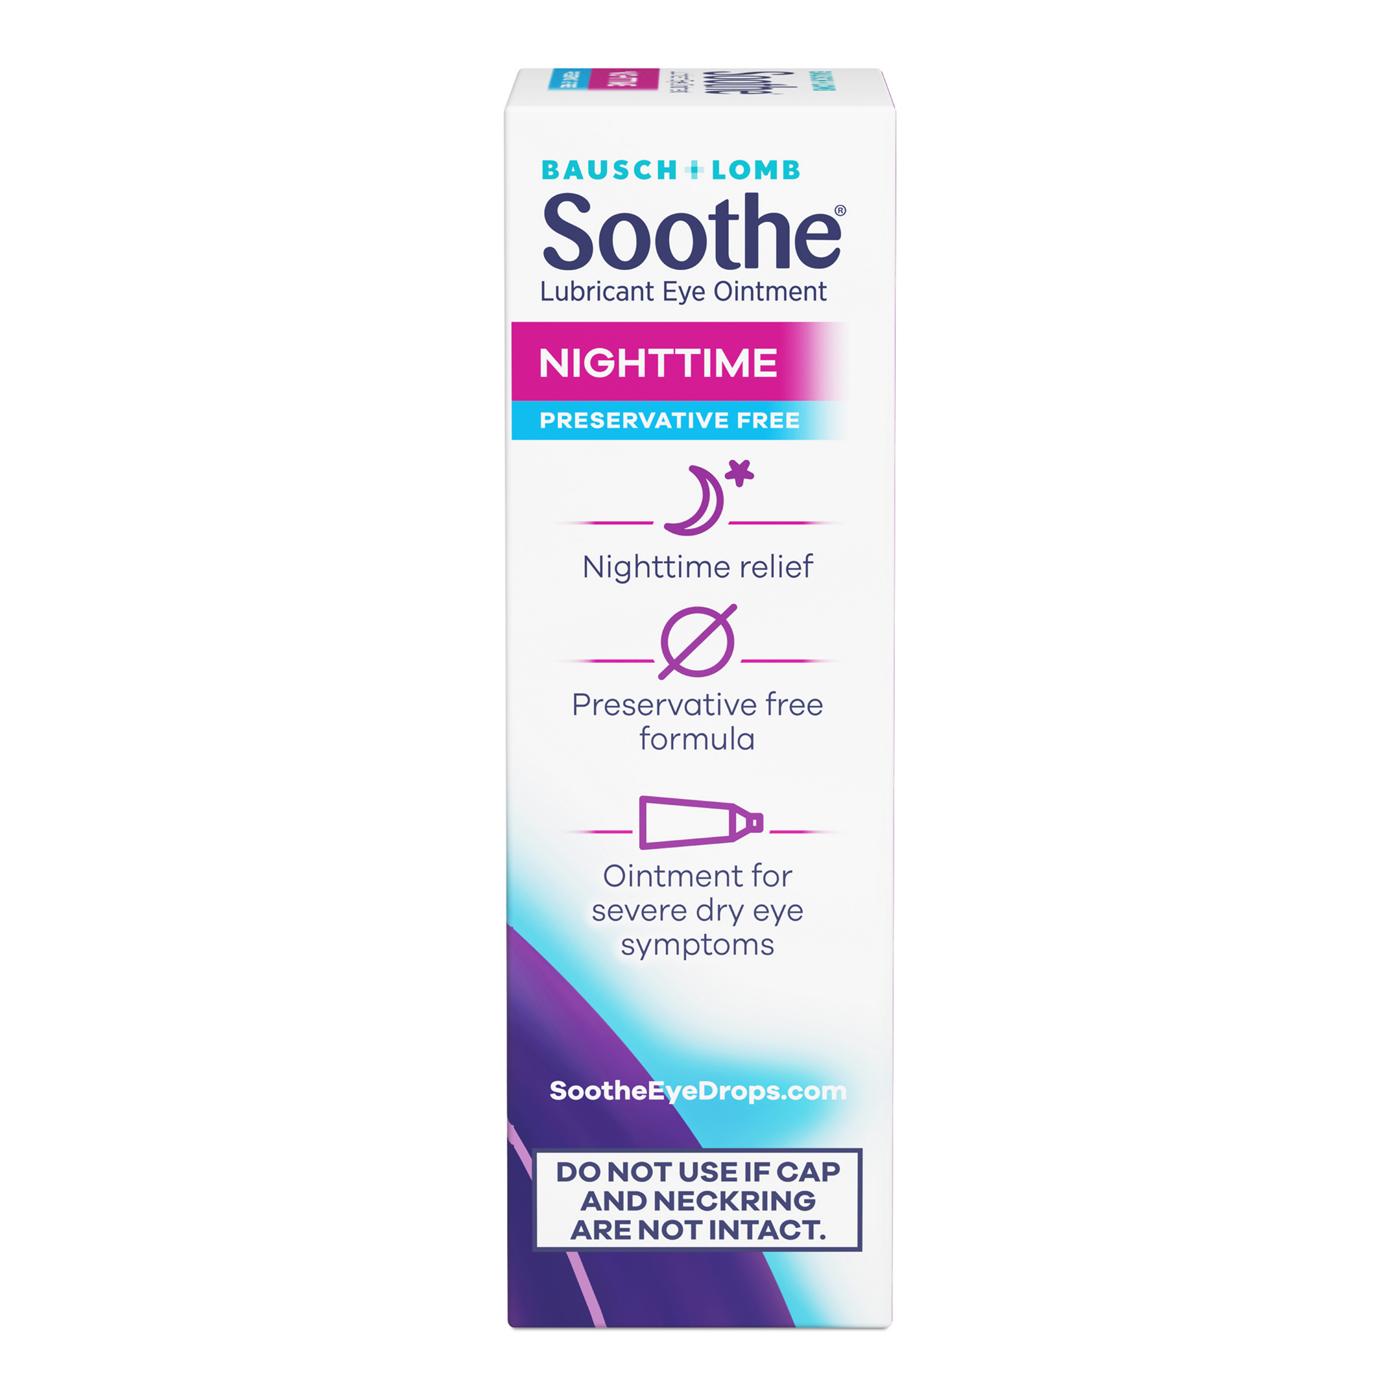 Bausch & Lomb Soothe Nighttime Dry Eye Ointment; image 3 of 4